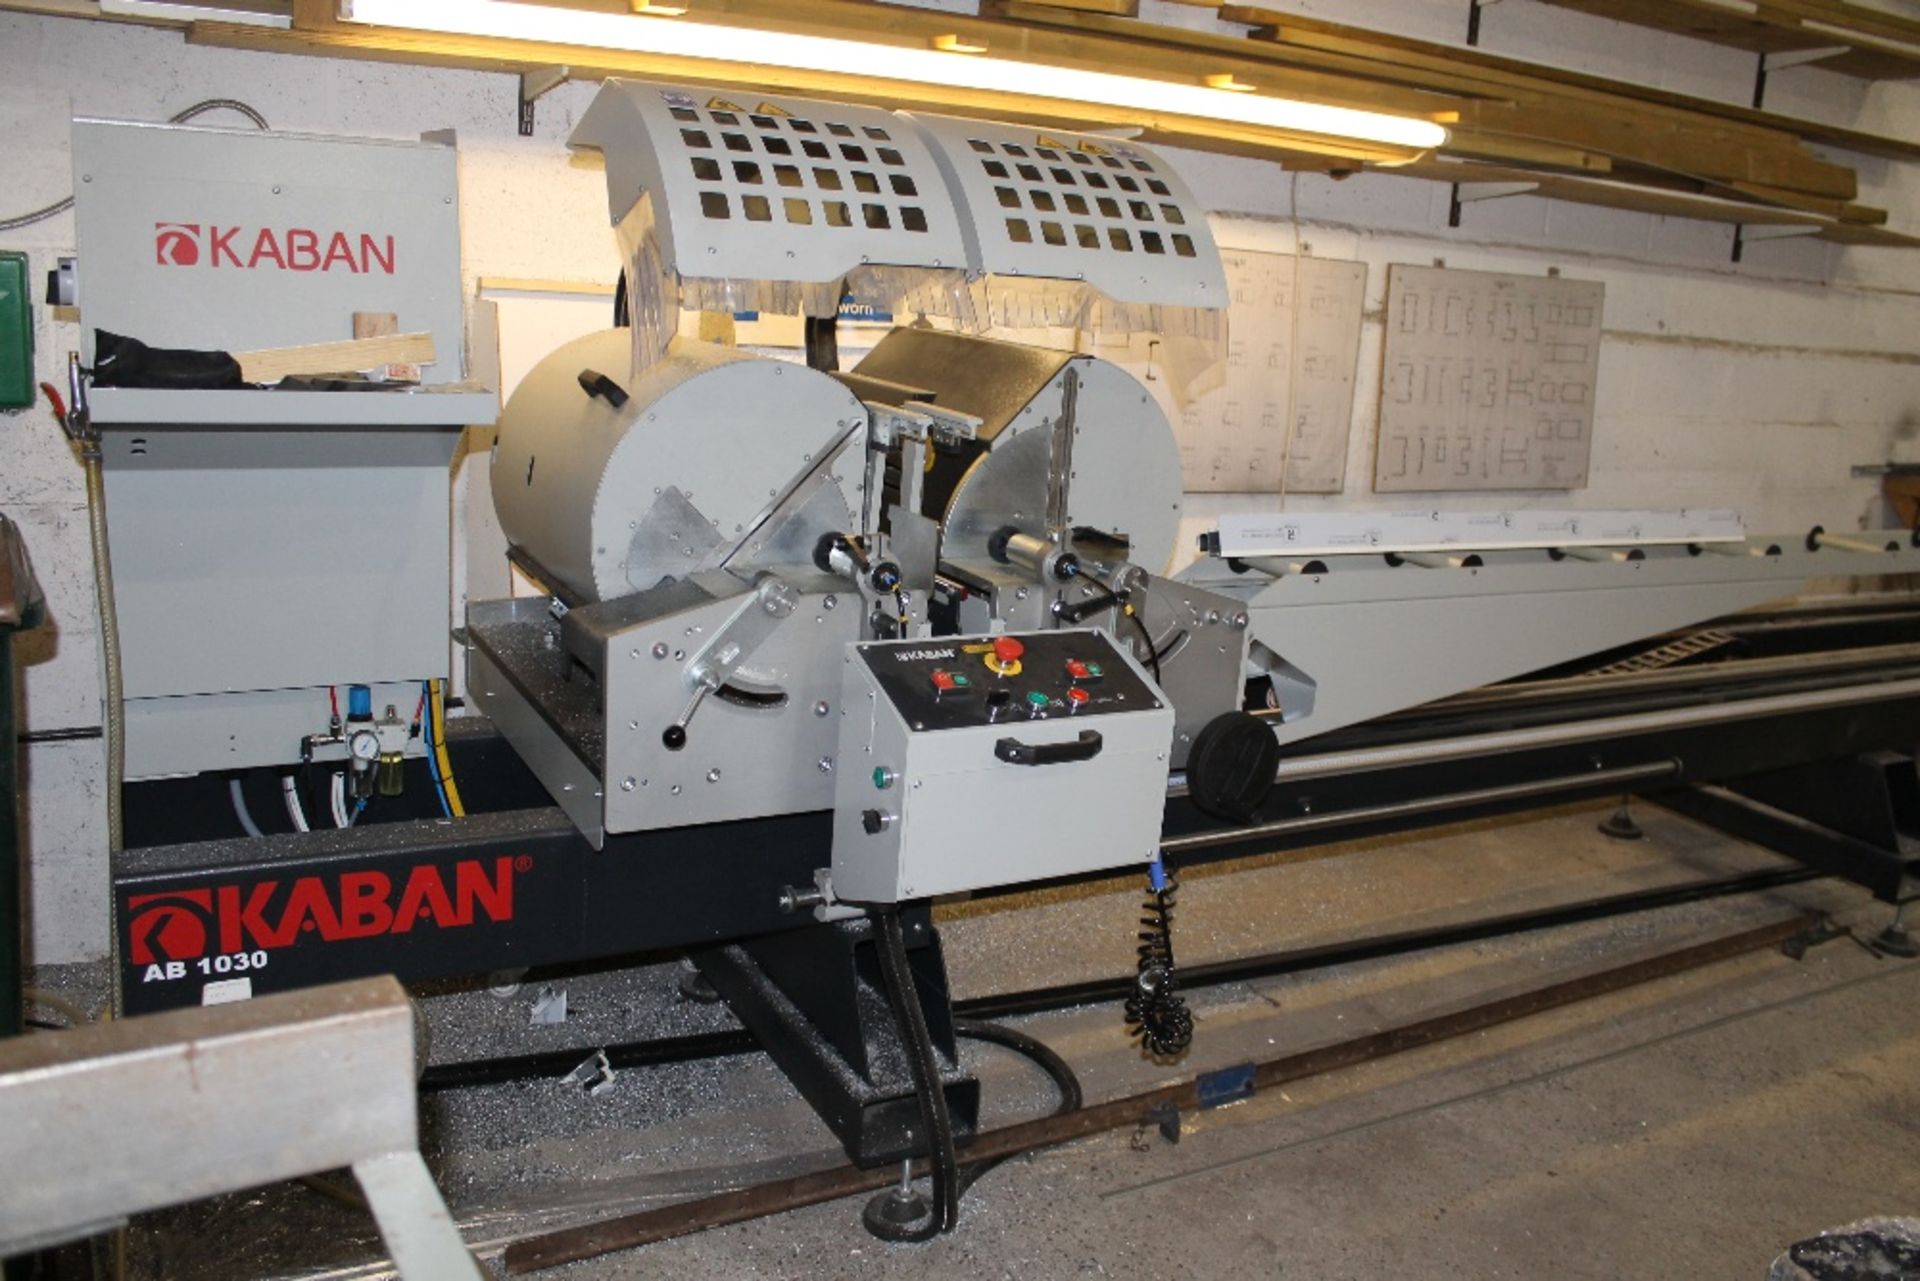 Kaban Double Headed Mitre Saw AB1030 – Tested – NO VAT This machine was purchased New in July 2015